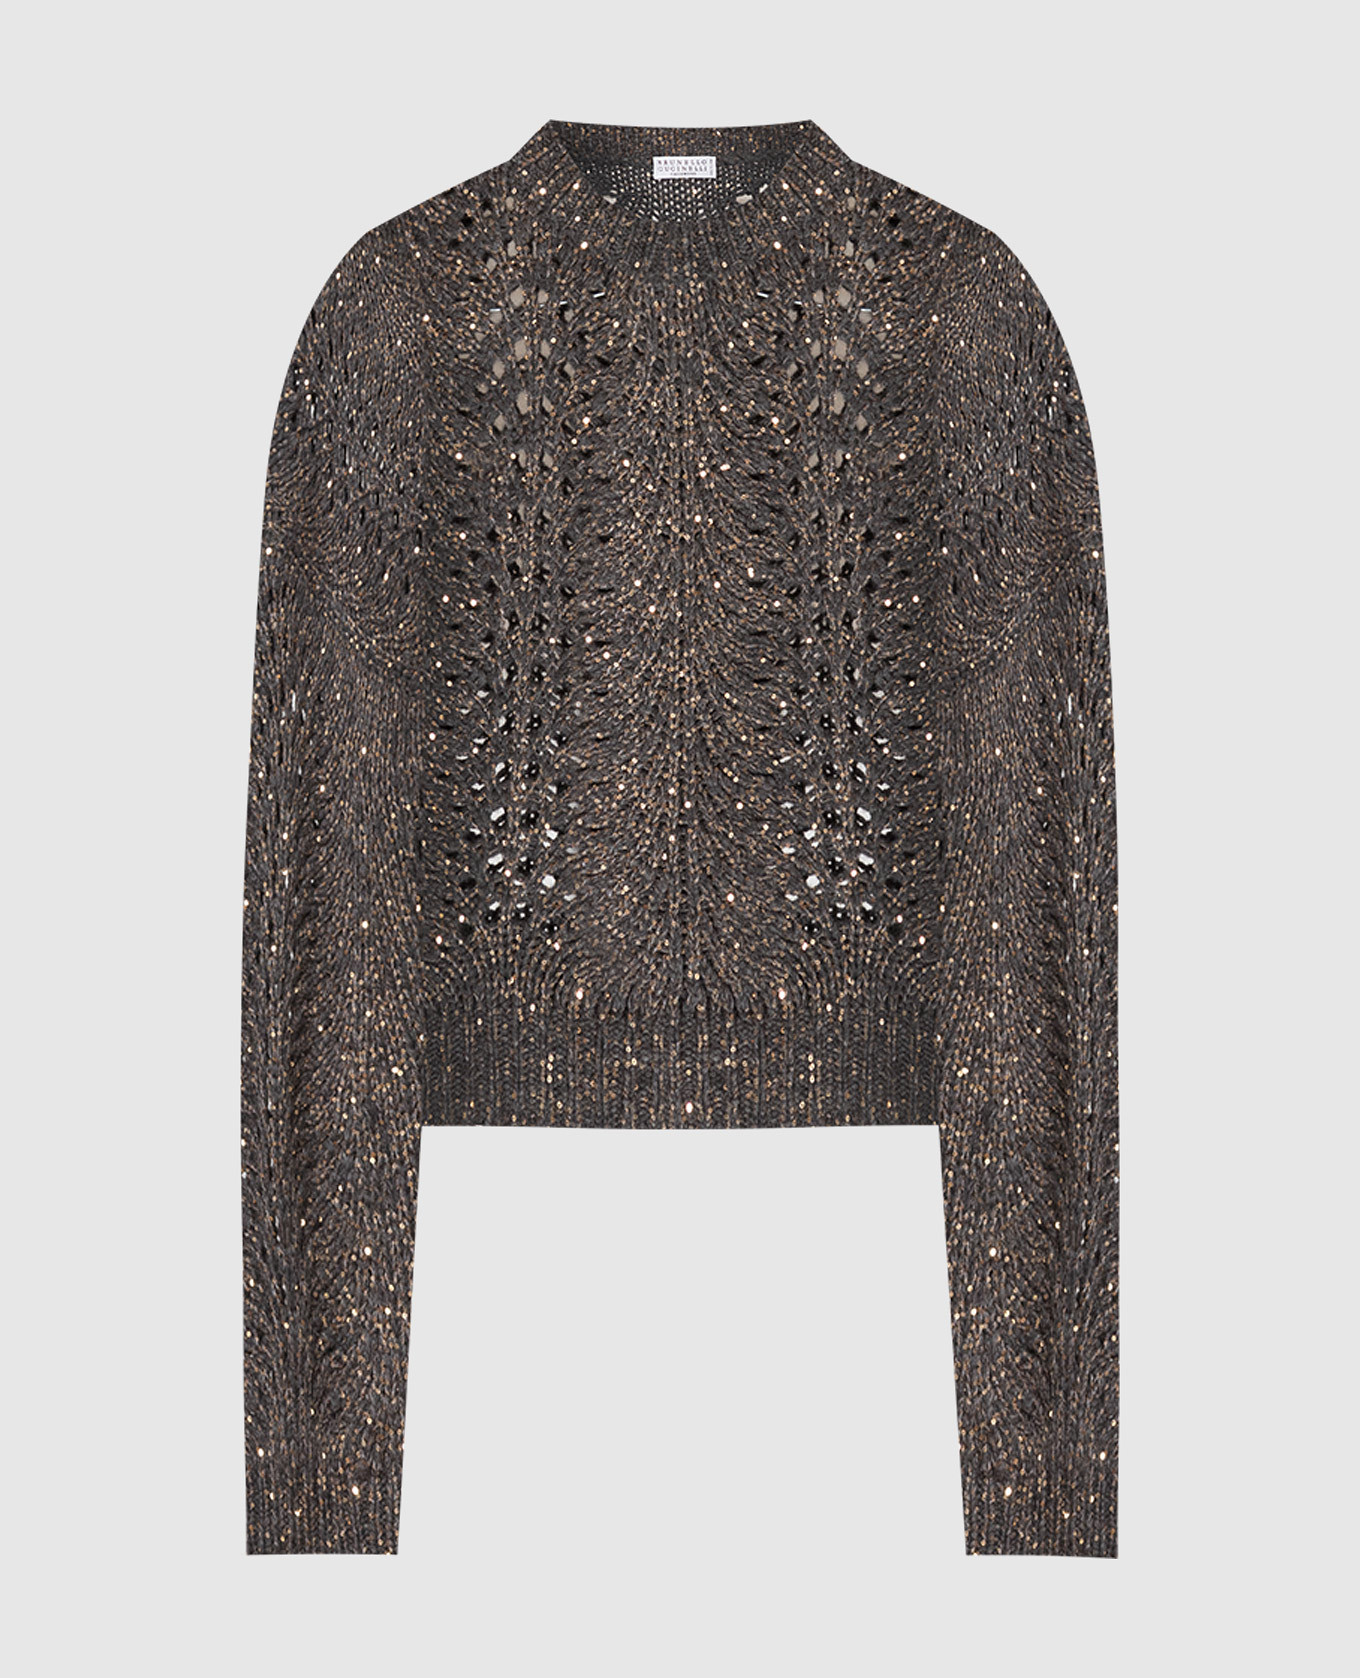 Gray sweater in an openwork pattern with sequins